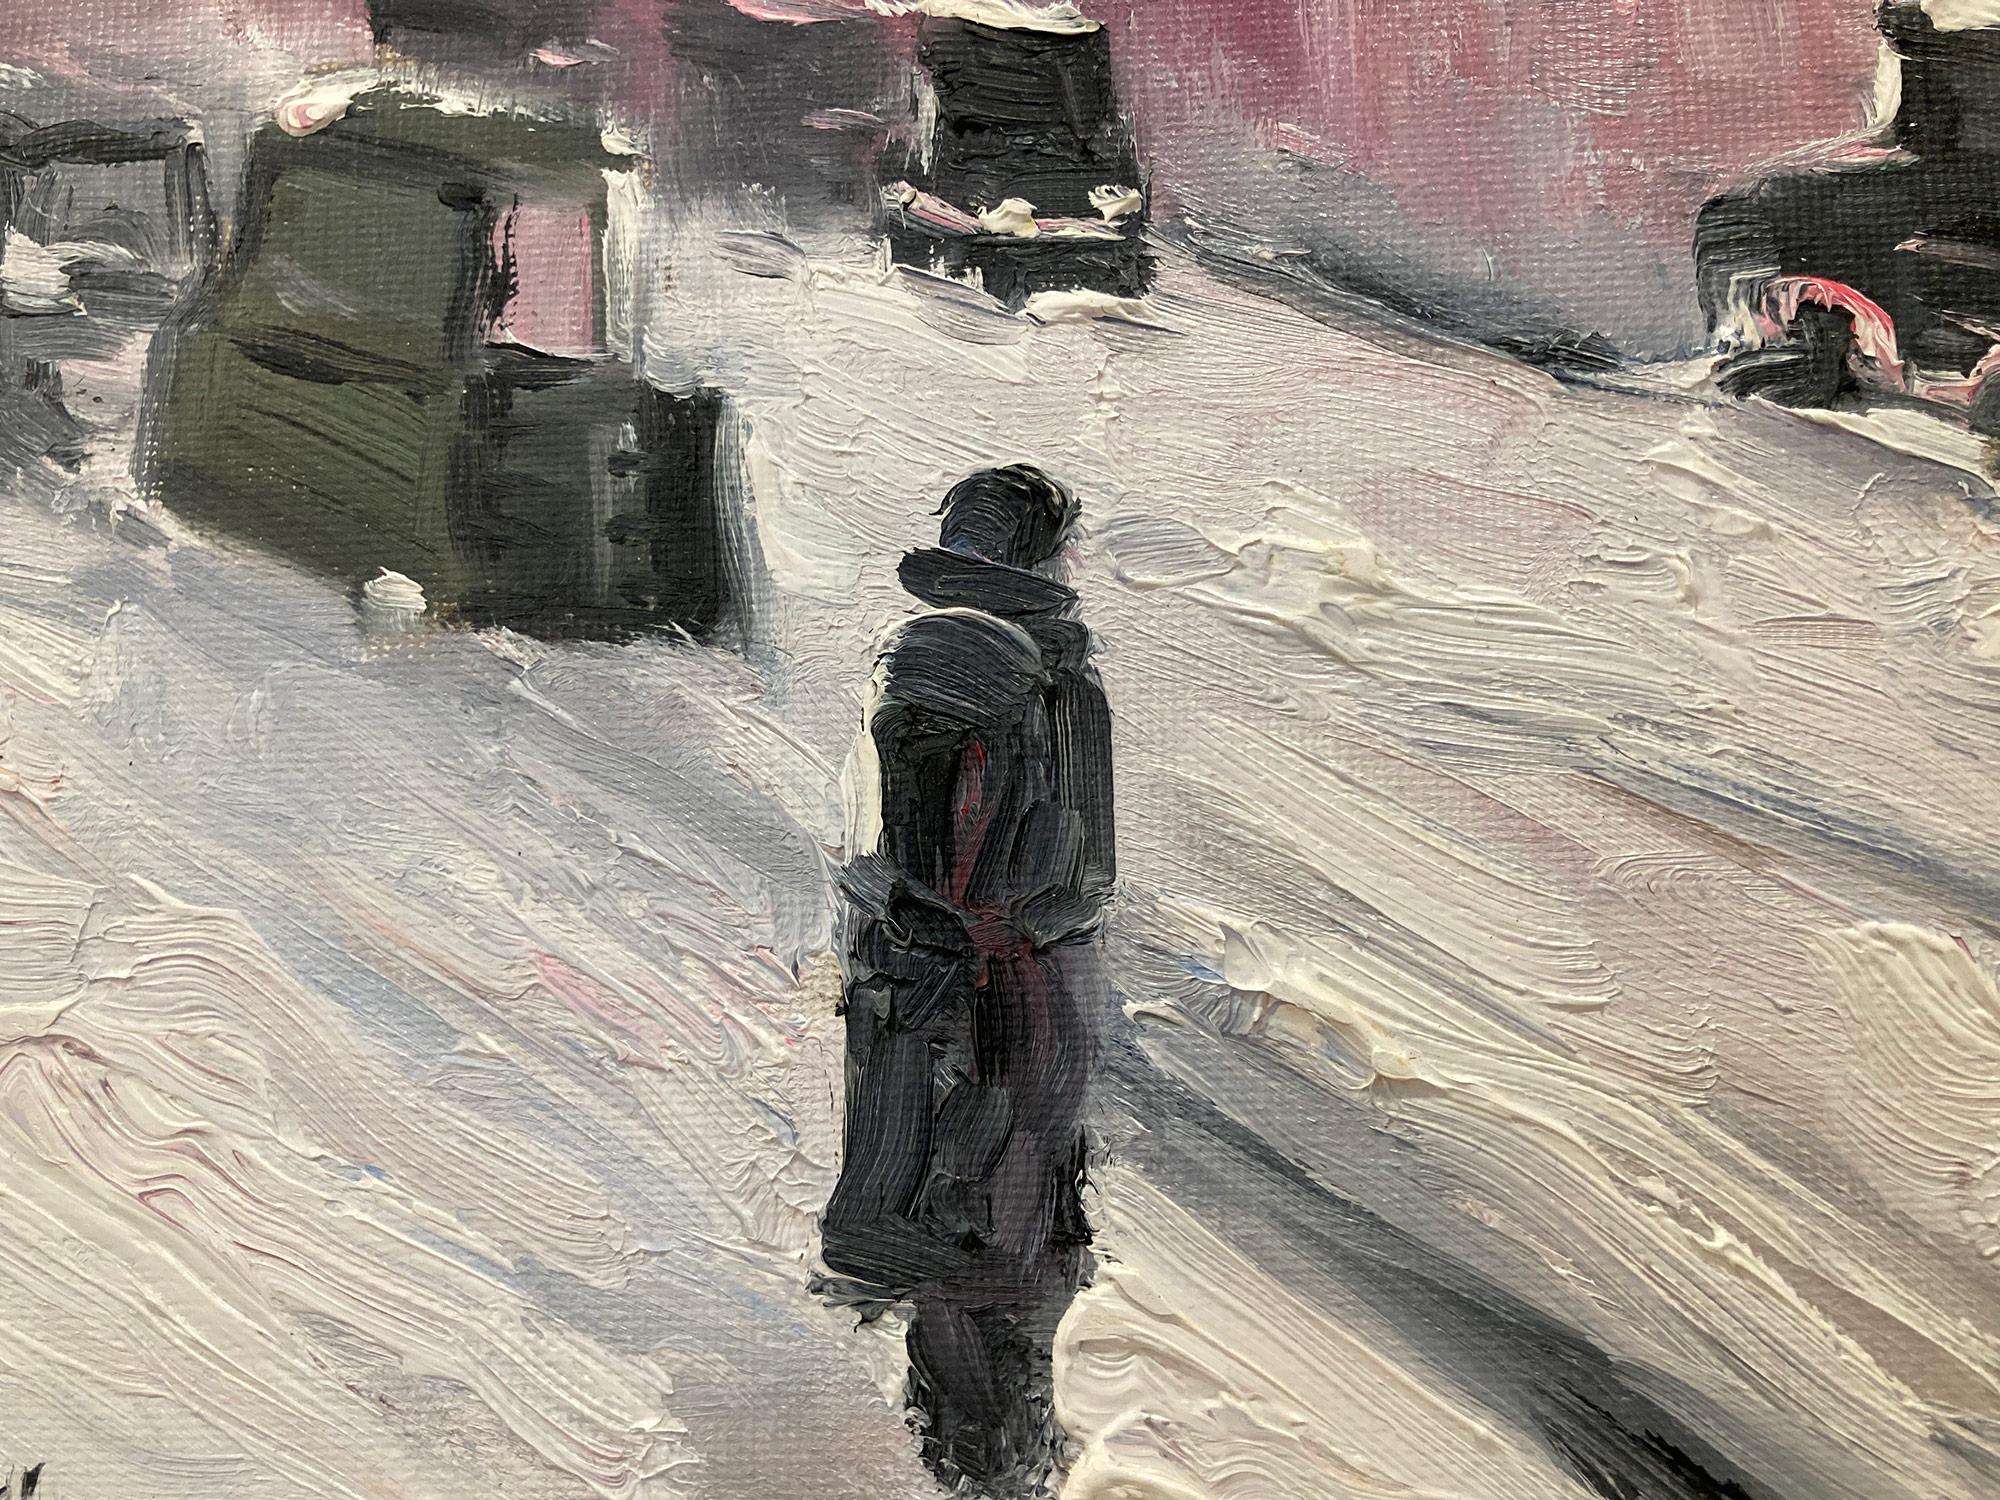 An impressionistic depiction of a figure in the snow with cars and buildings in the busy City Streets. The Empire State Building is portrayed in the background as the snow filled streets brings a sense of nostalgia. This painting goes back in time